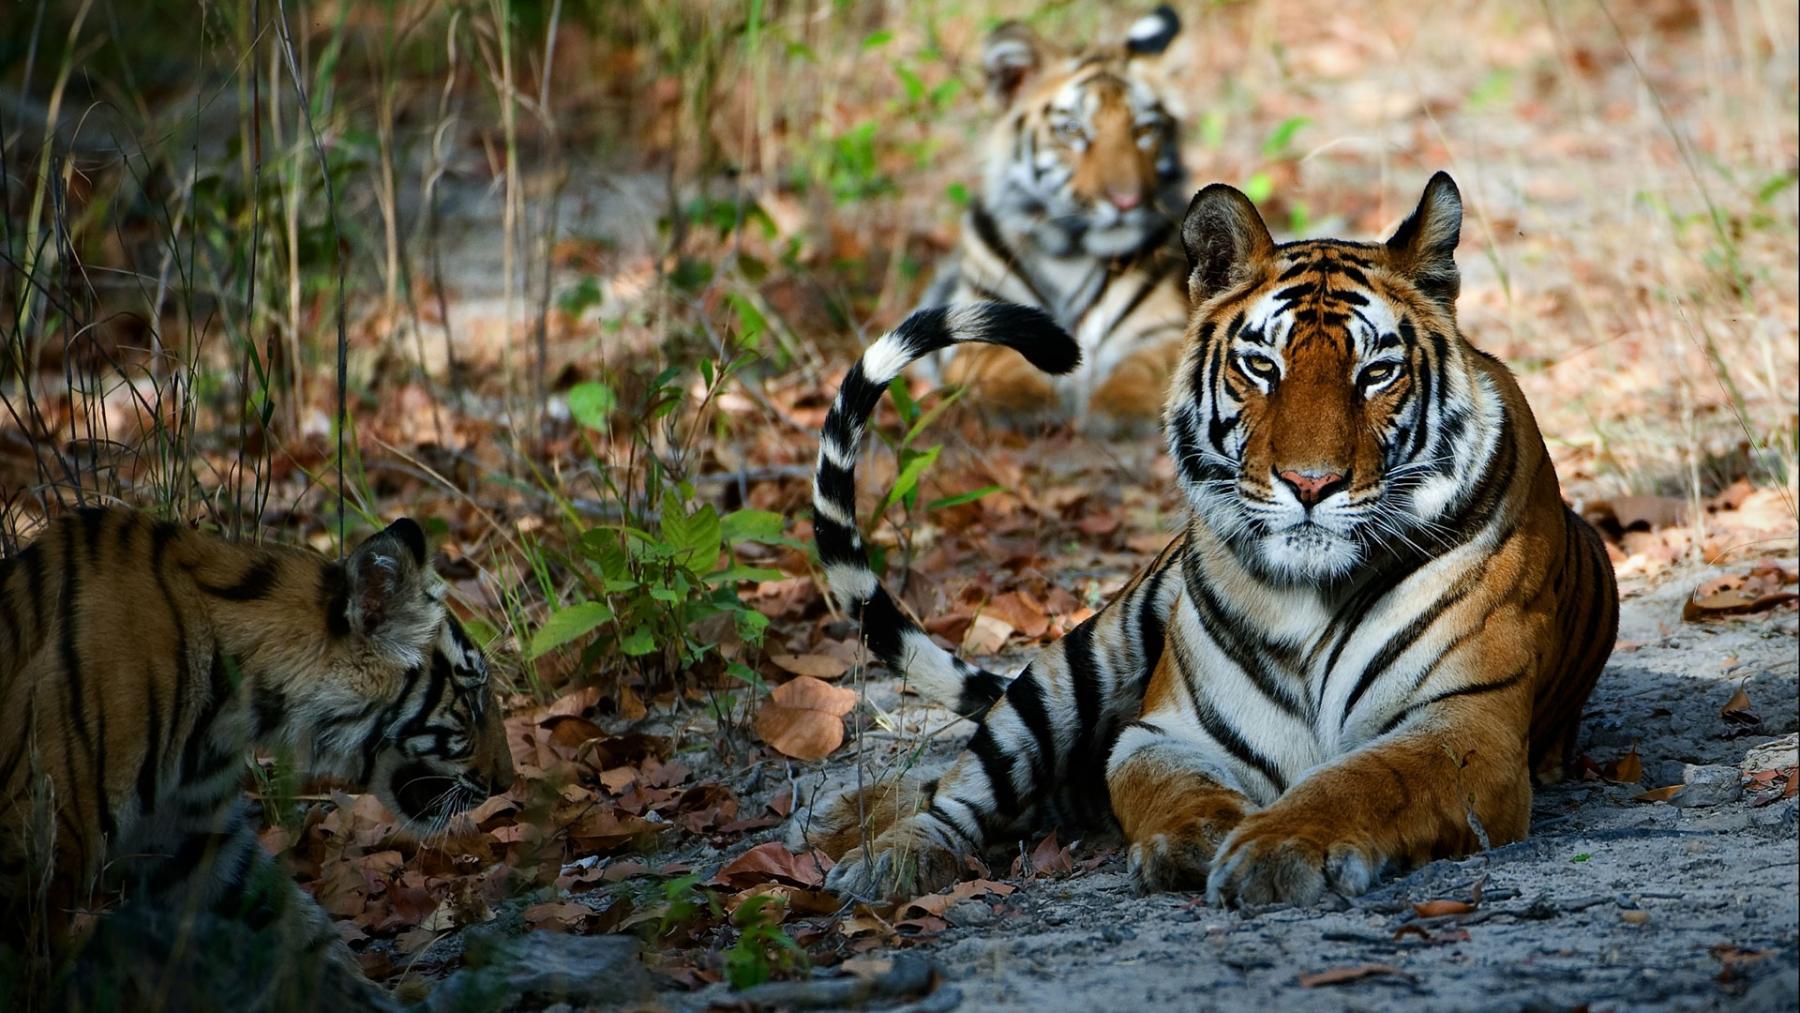 Tigers in Gir National Park